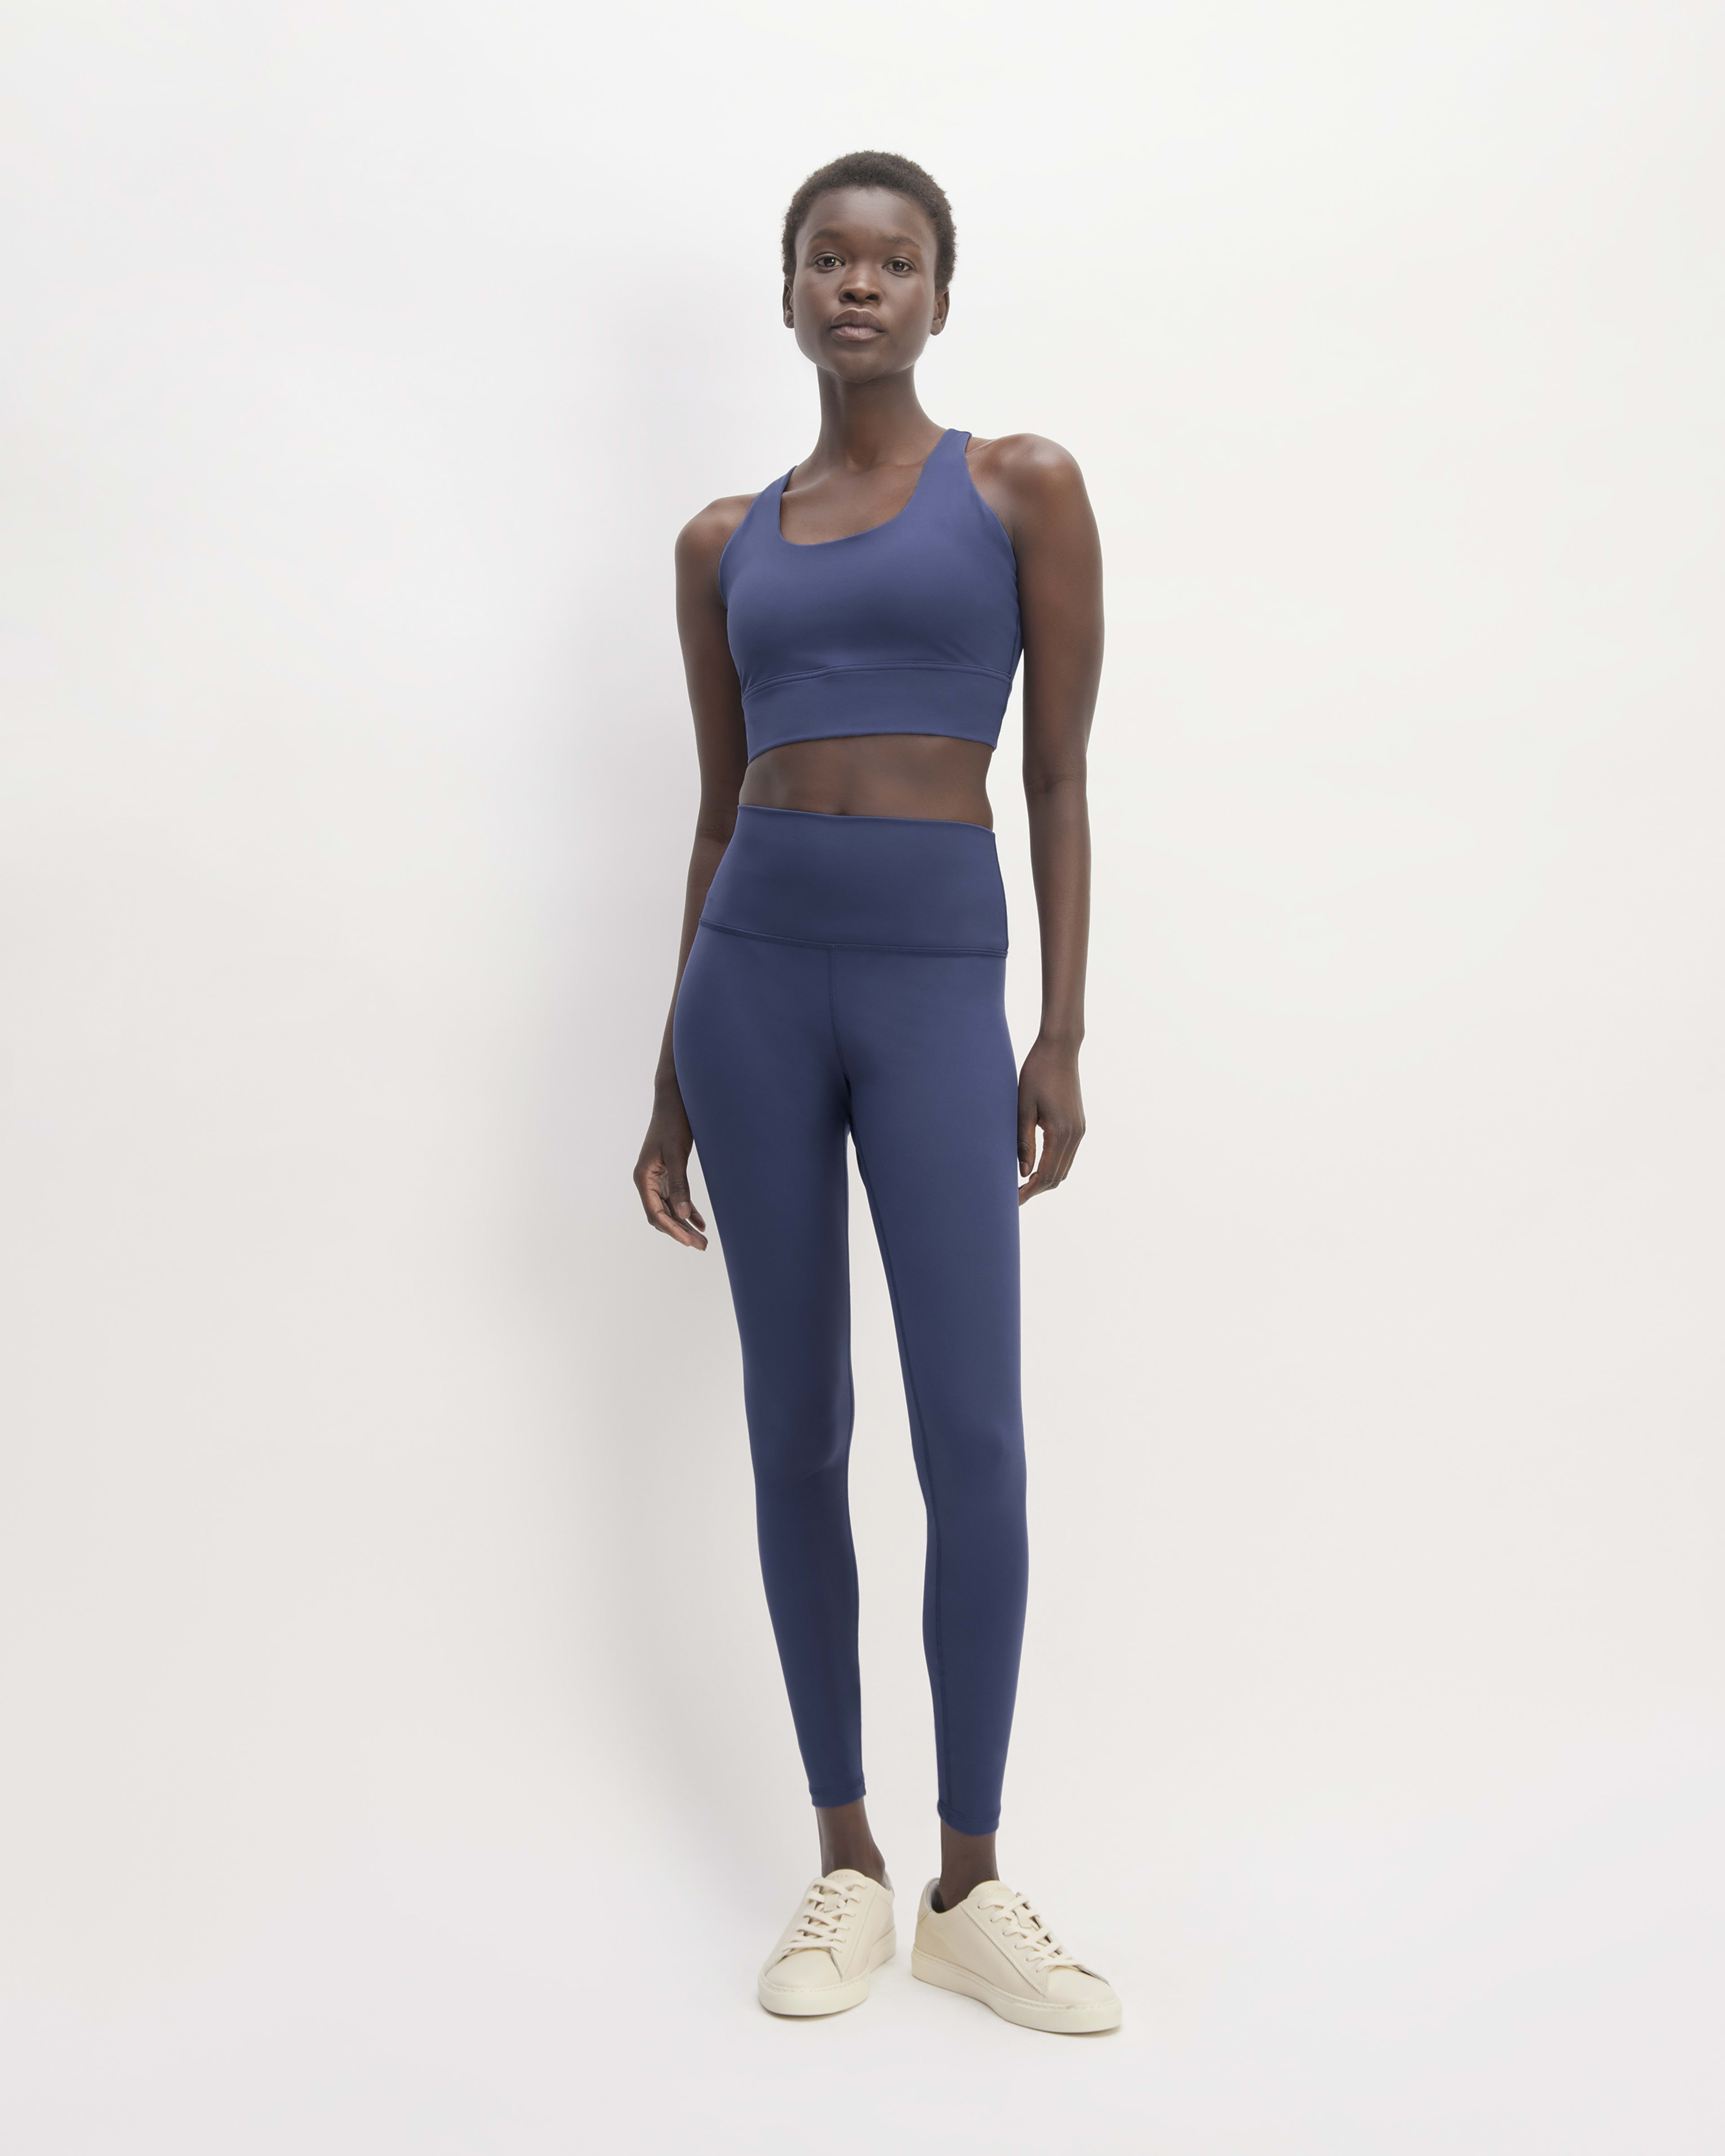 Everlane just released its new Perform Leggings